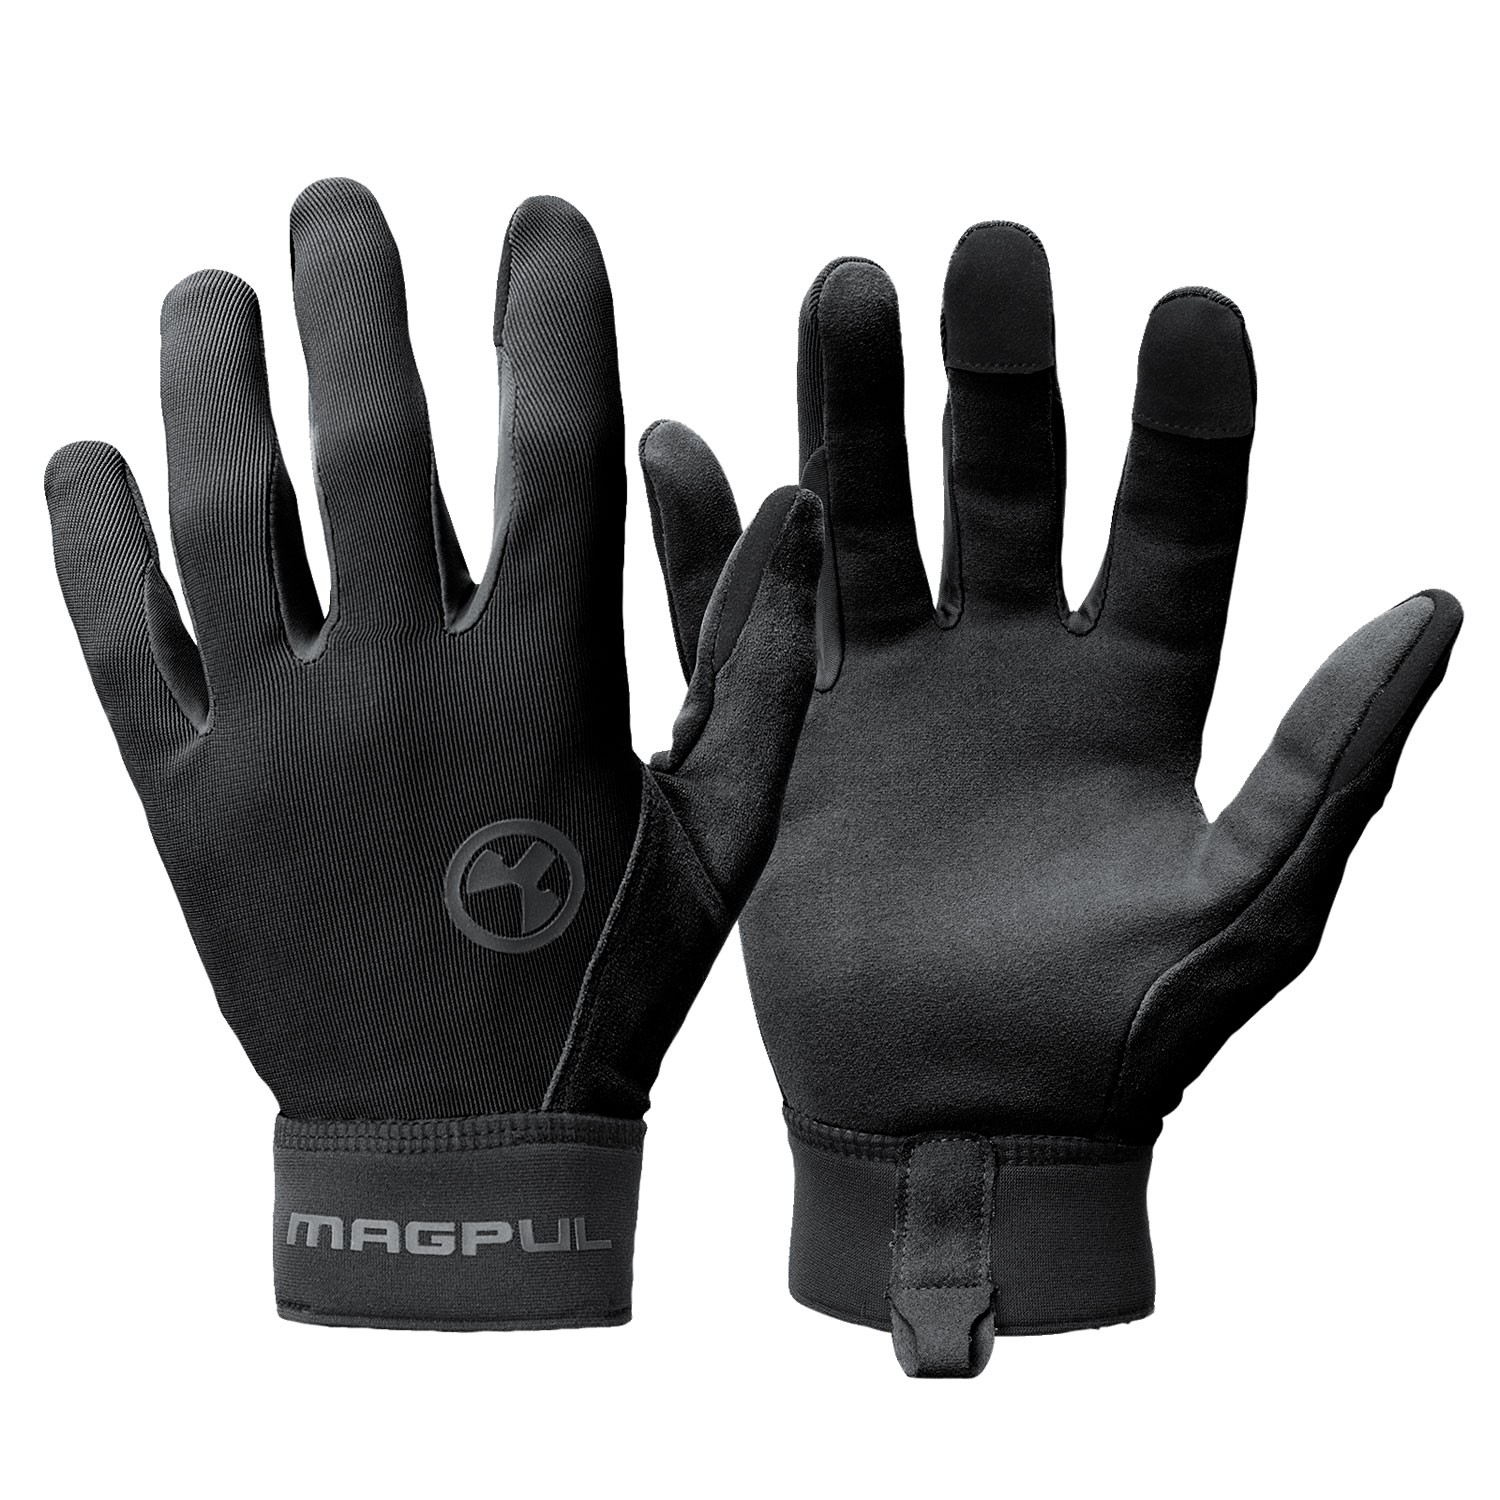 MAGPUL TECHNICAL GLOVES, LG, BLACK, HAS TOUCHSCREEN CAPABLE FINGER TIPS.